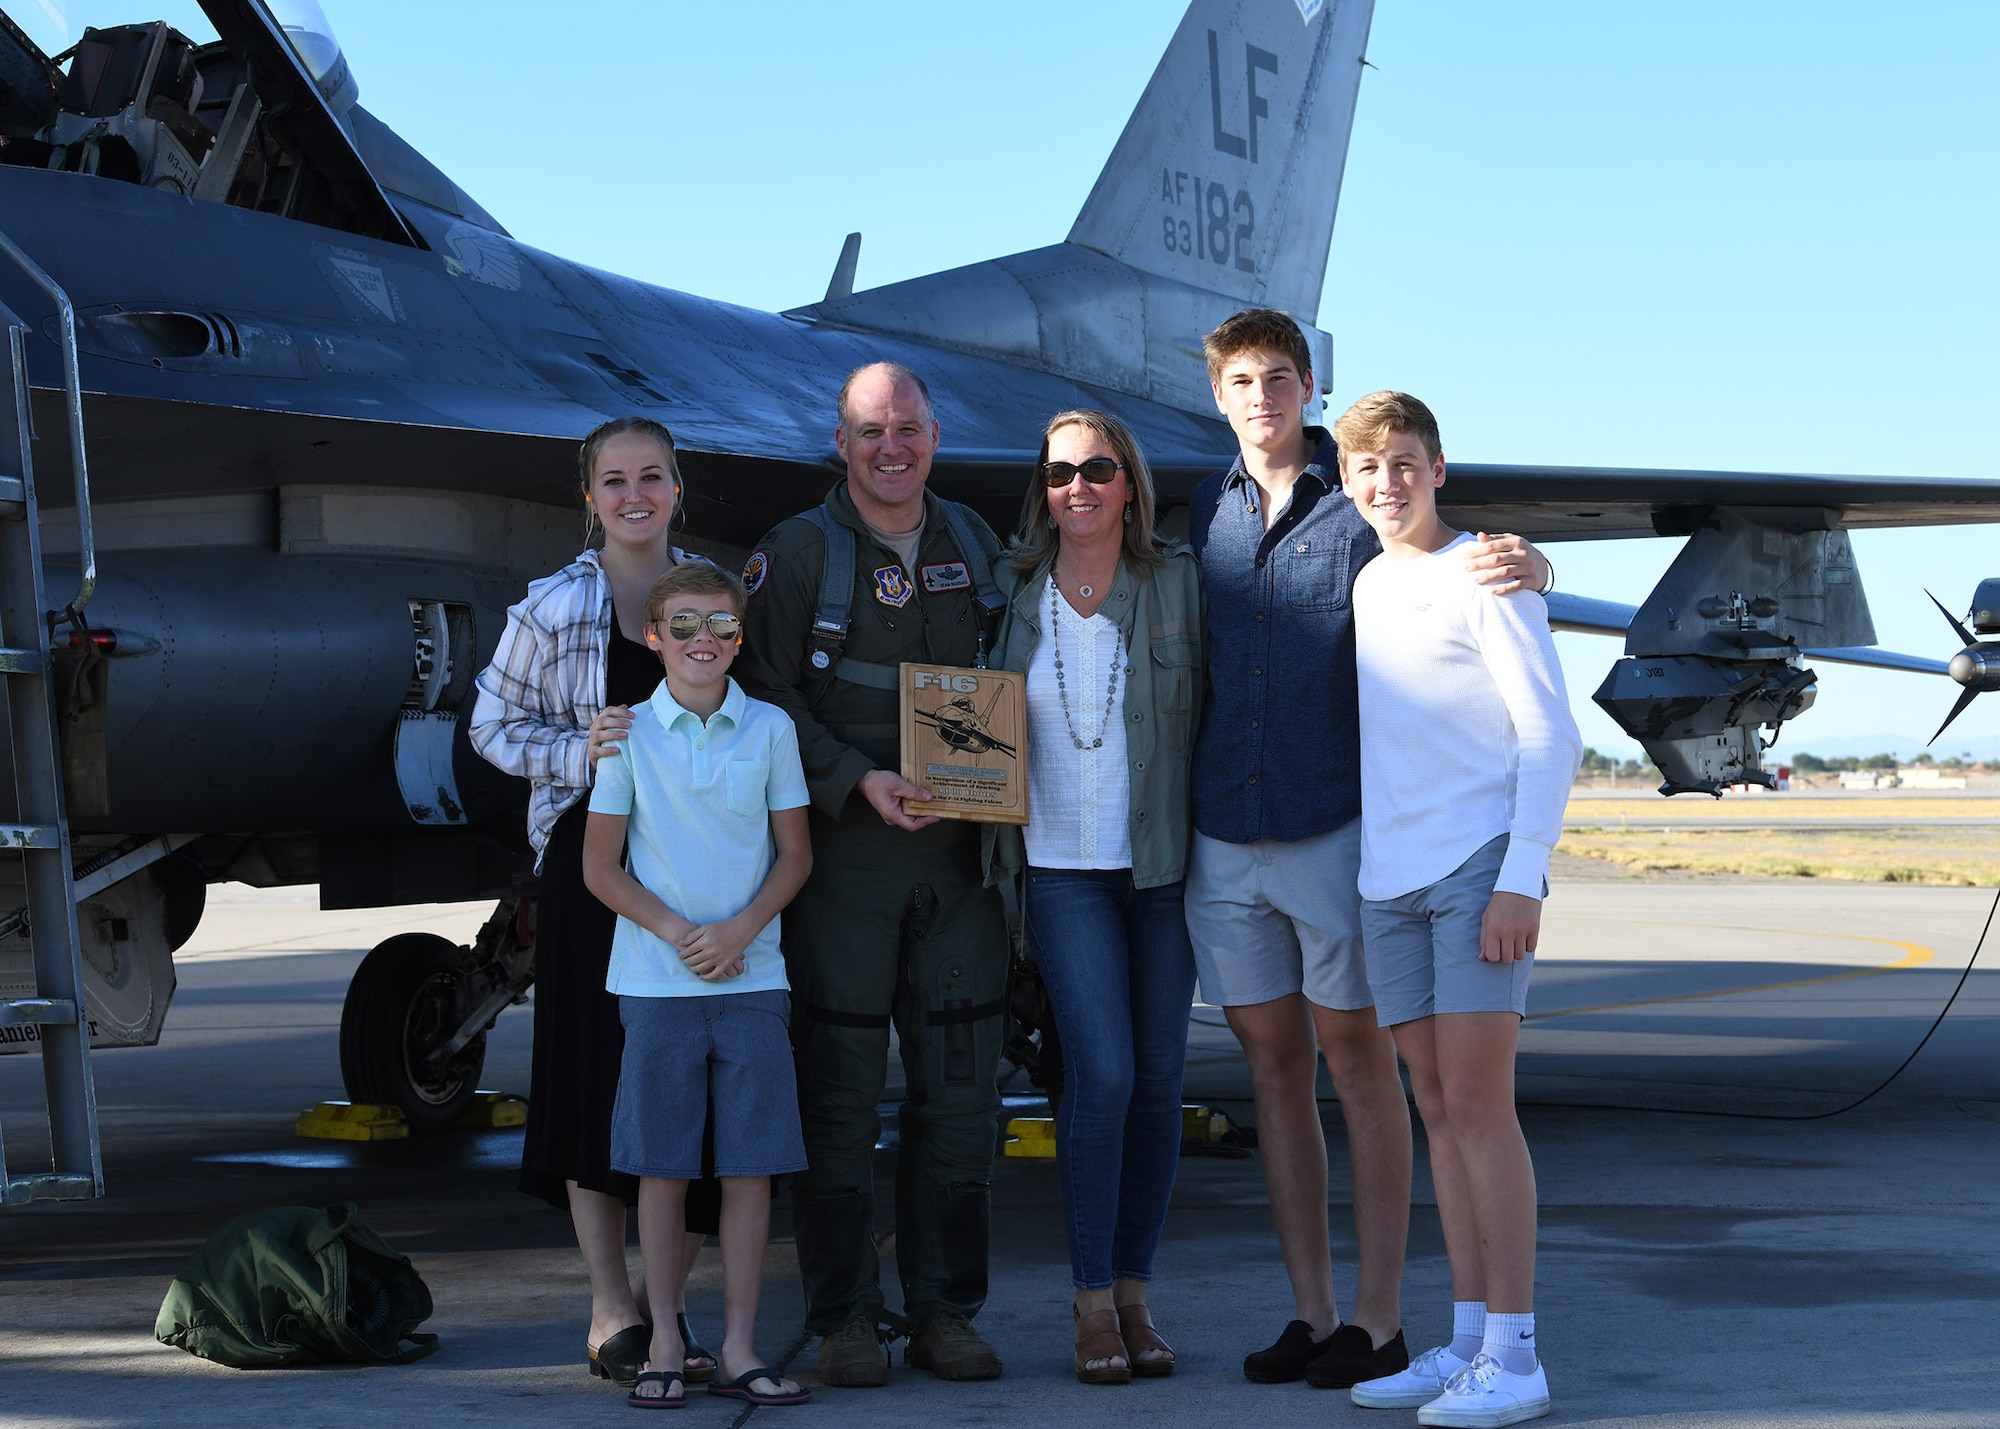 Col. Sean Rassas, 944th Fighter Wing vice commander, poses with his family in front of an F-16 Fighting Falcon following his 2,024th sortie Nov. 24, 2020, at Luke Air Force Base, Ariz.  During the flight, Rassas surpassed three thousand hours in the F-16, becoming one of only 296 U.S. Air Force pilots to reach that unique milestone.